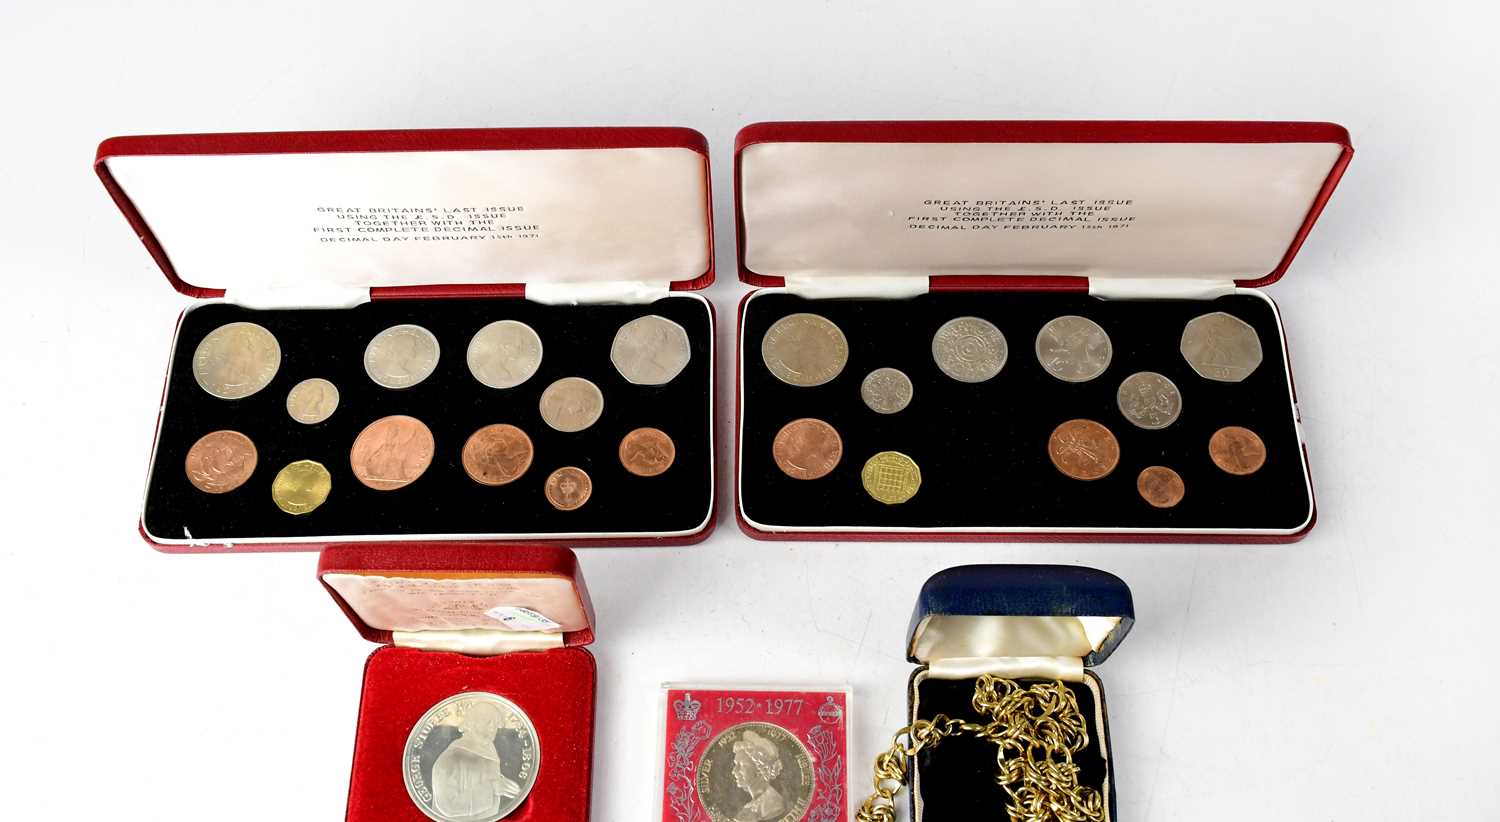 Two cased sets of mint Elizabeth II 'Great Britain's Last Issue Using the £.s.d', together with - Image 3 of 3